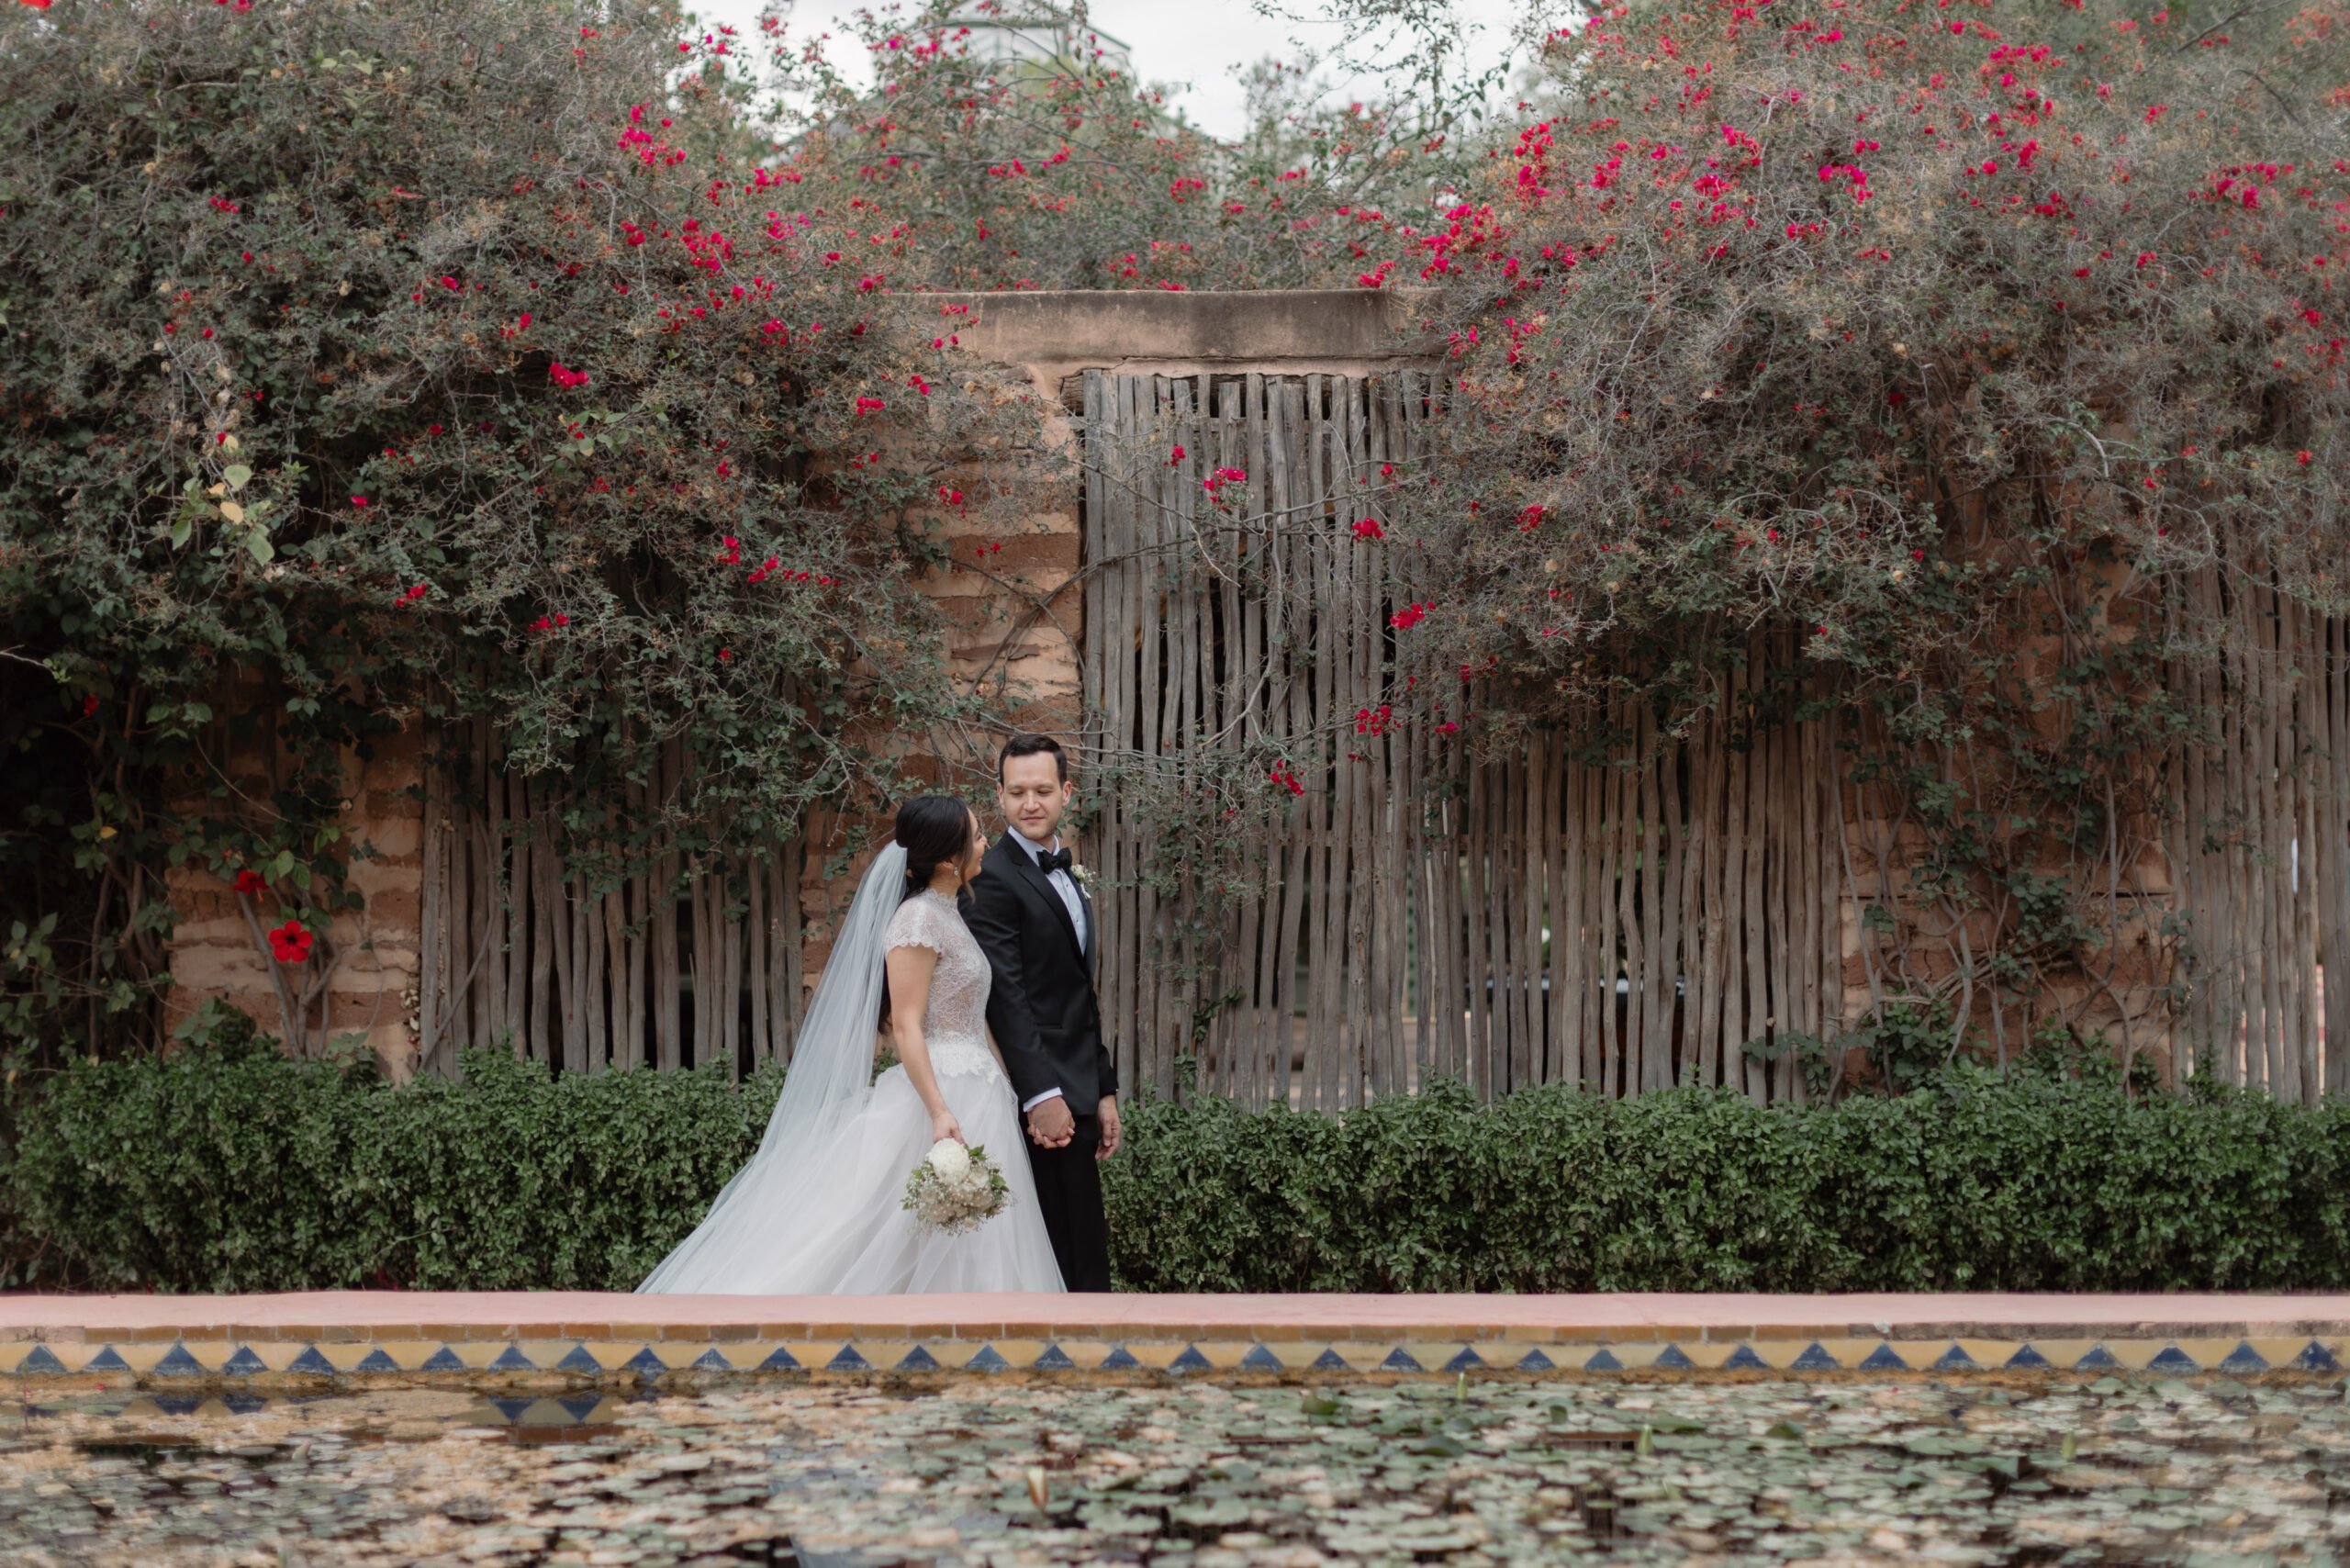 Bride and groom outside of their venue at Beldi Country Club wedding in Marrakech